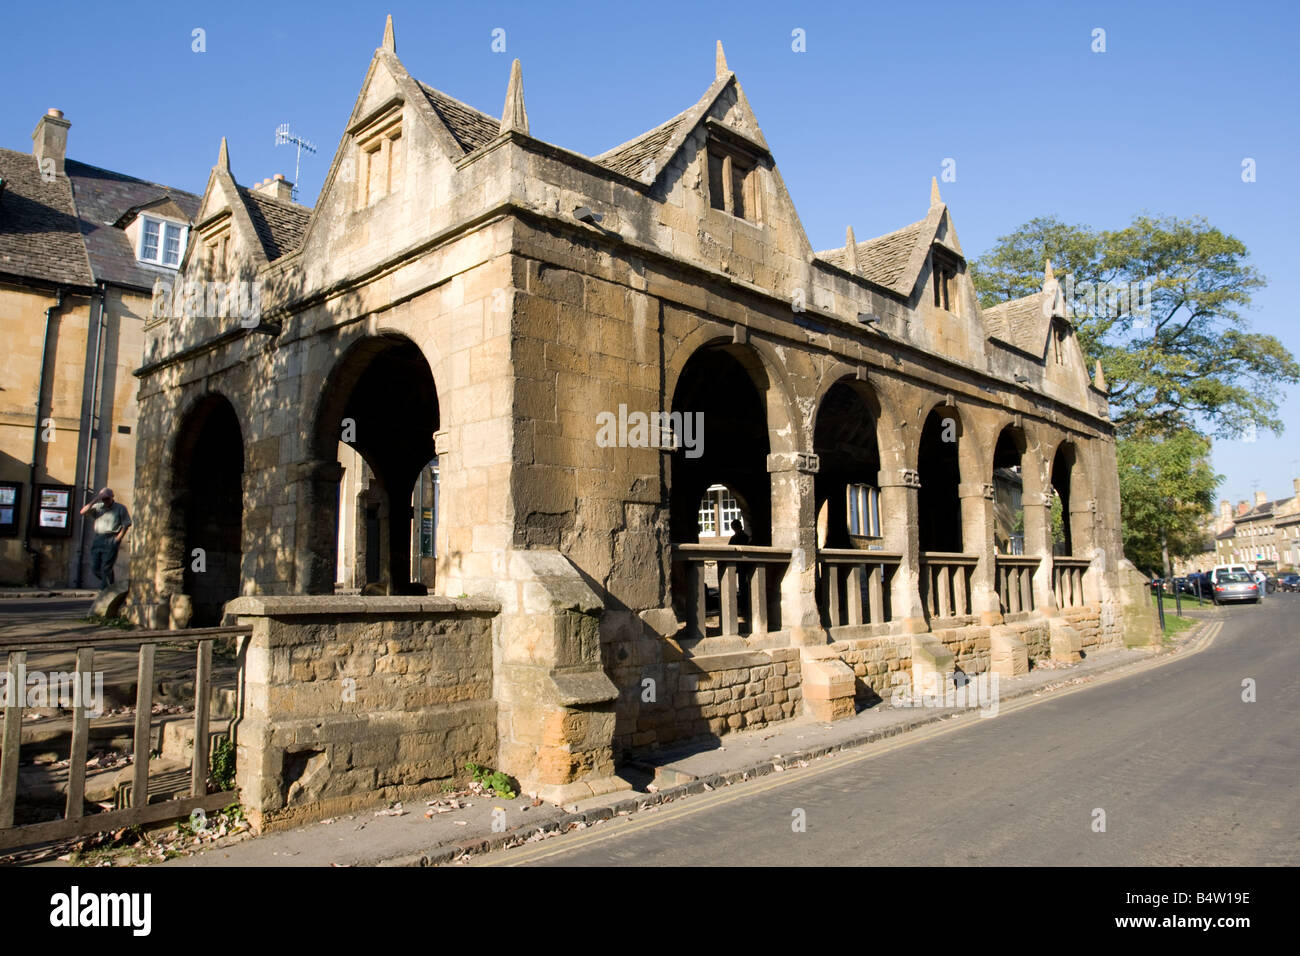 Old Wool Market or Market Hall was built in 1627 Chipping Campden Cotswolds UK Stock Photo